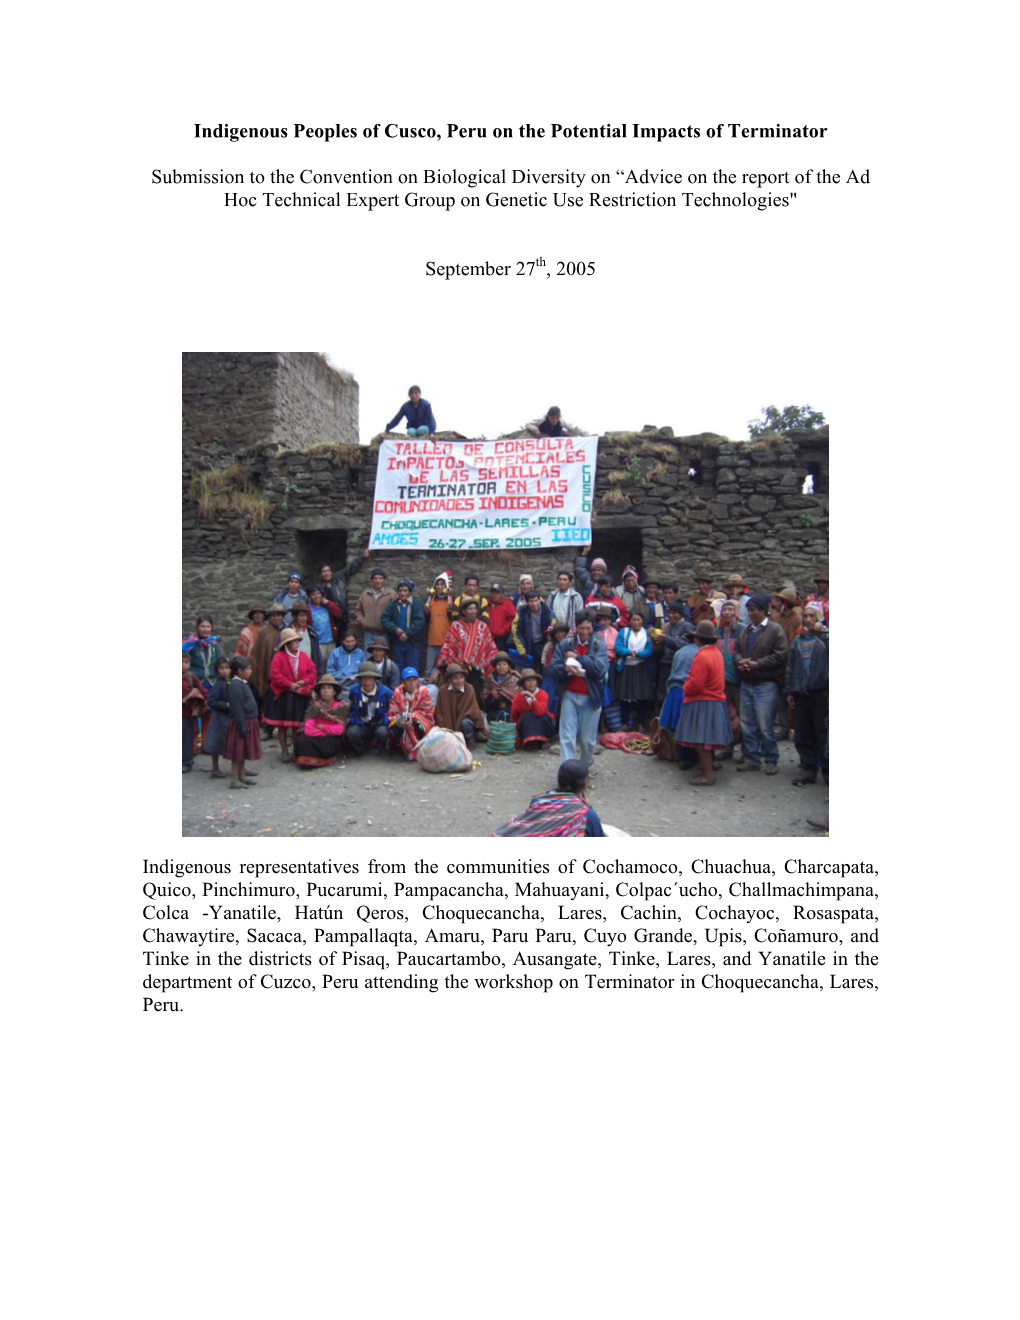 Declaration of Indigenous Peoples of Cuzco, Peru On